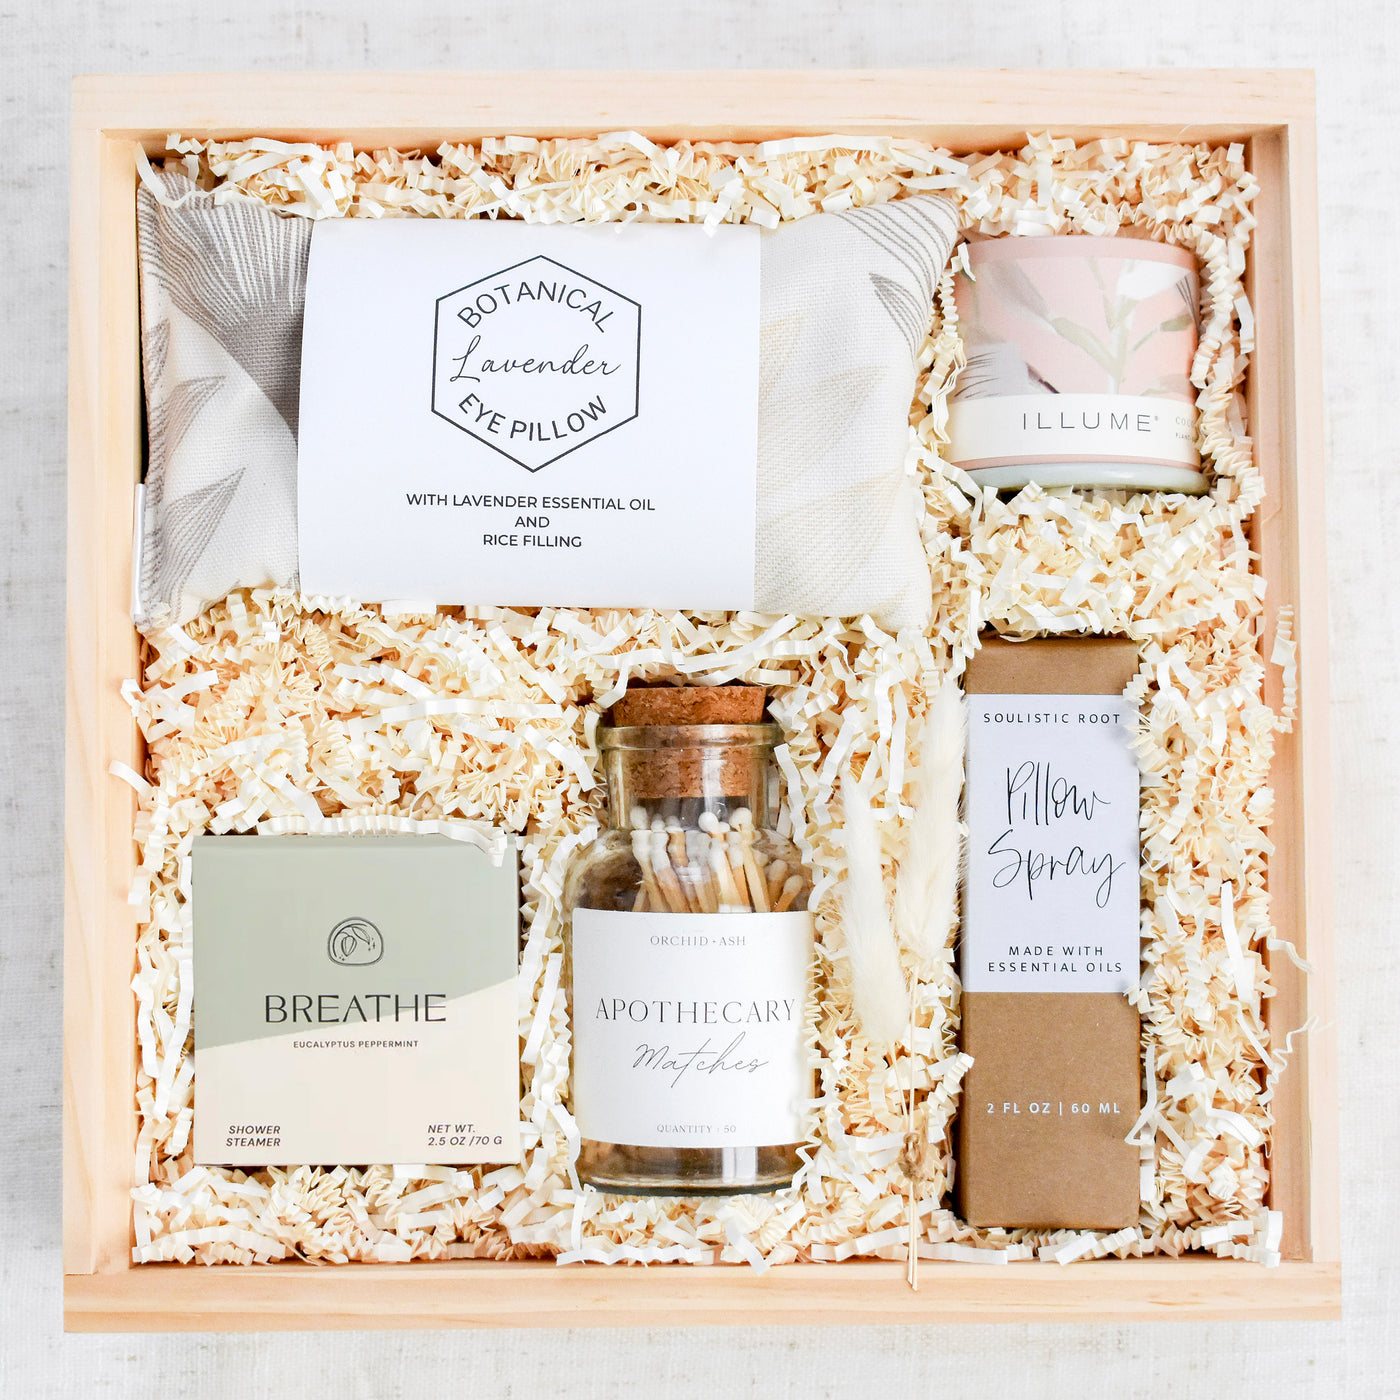 Enjoy this carefully curated gift box with all the makings for an unforgettable self-care day or night. Includes: Weighted Botanical Lavender Eye Pillow, Coconut Milk Mango Tin Candle, Breathe Shower Steamer, Apothecary Matches, Pillow Spray